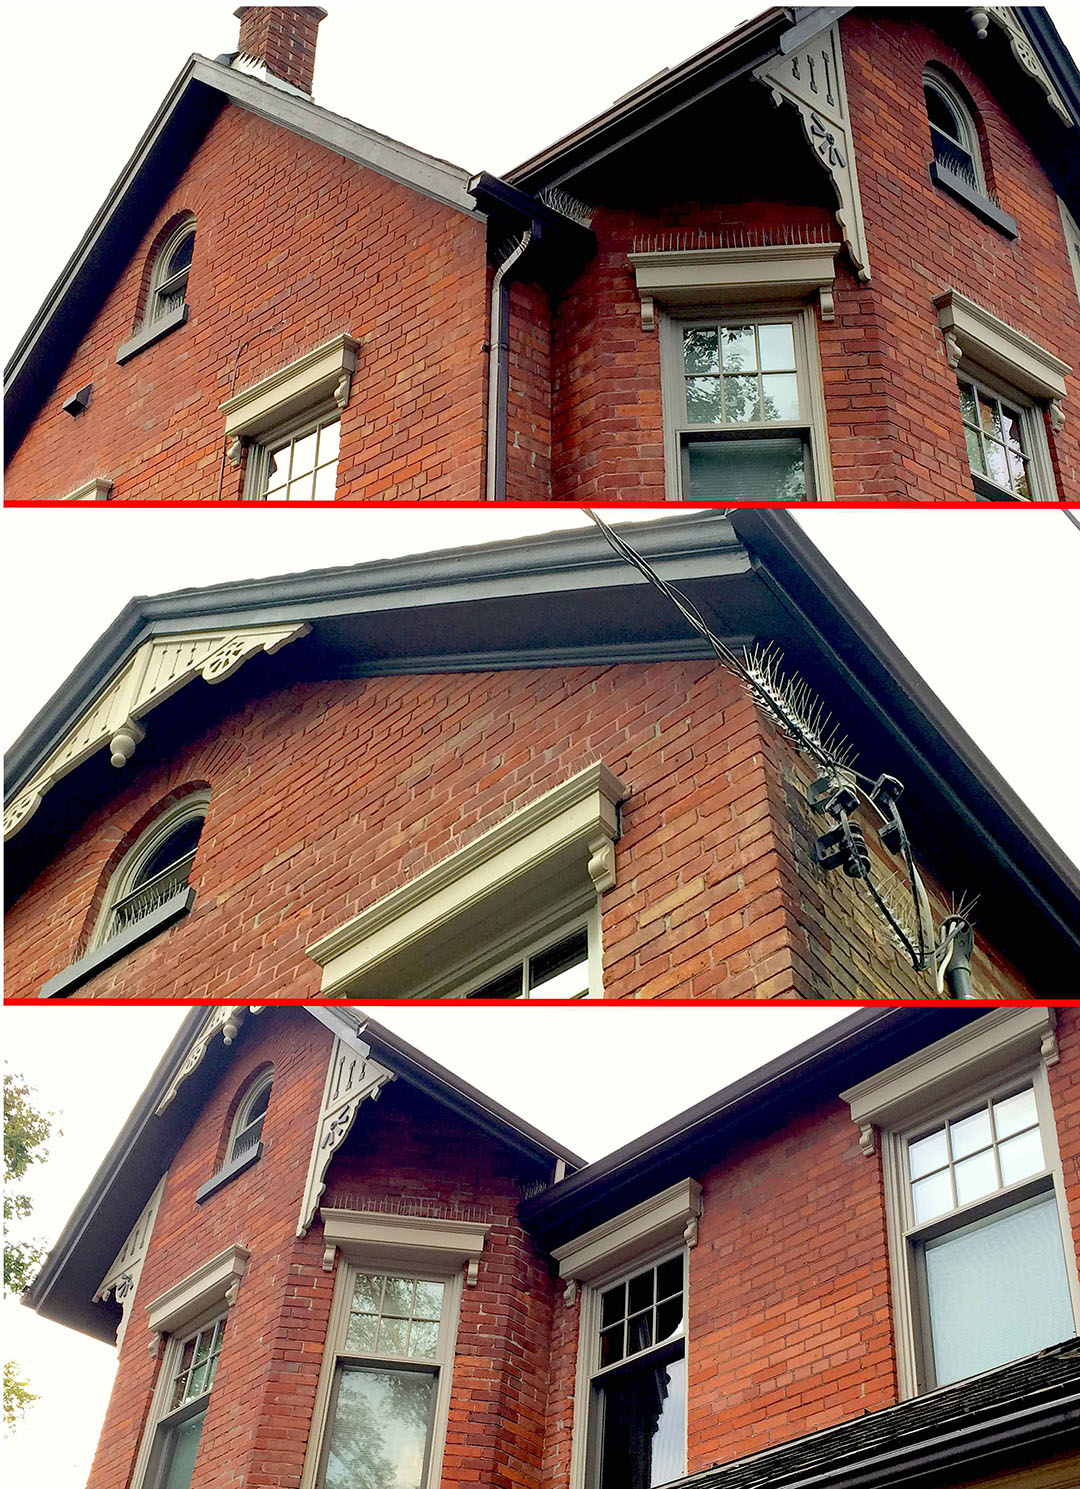 Pigeon removal - deterrents installed on a residential home.